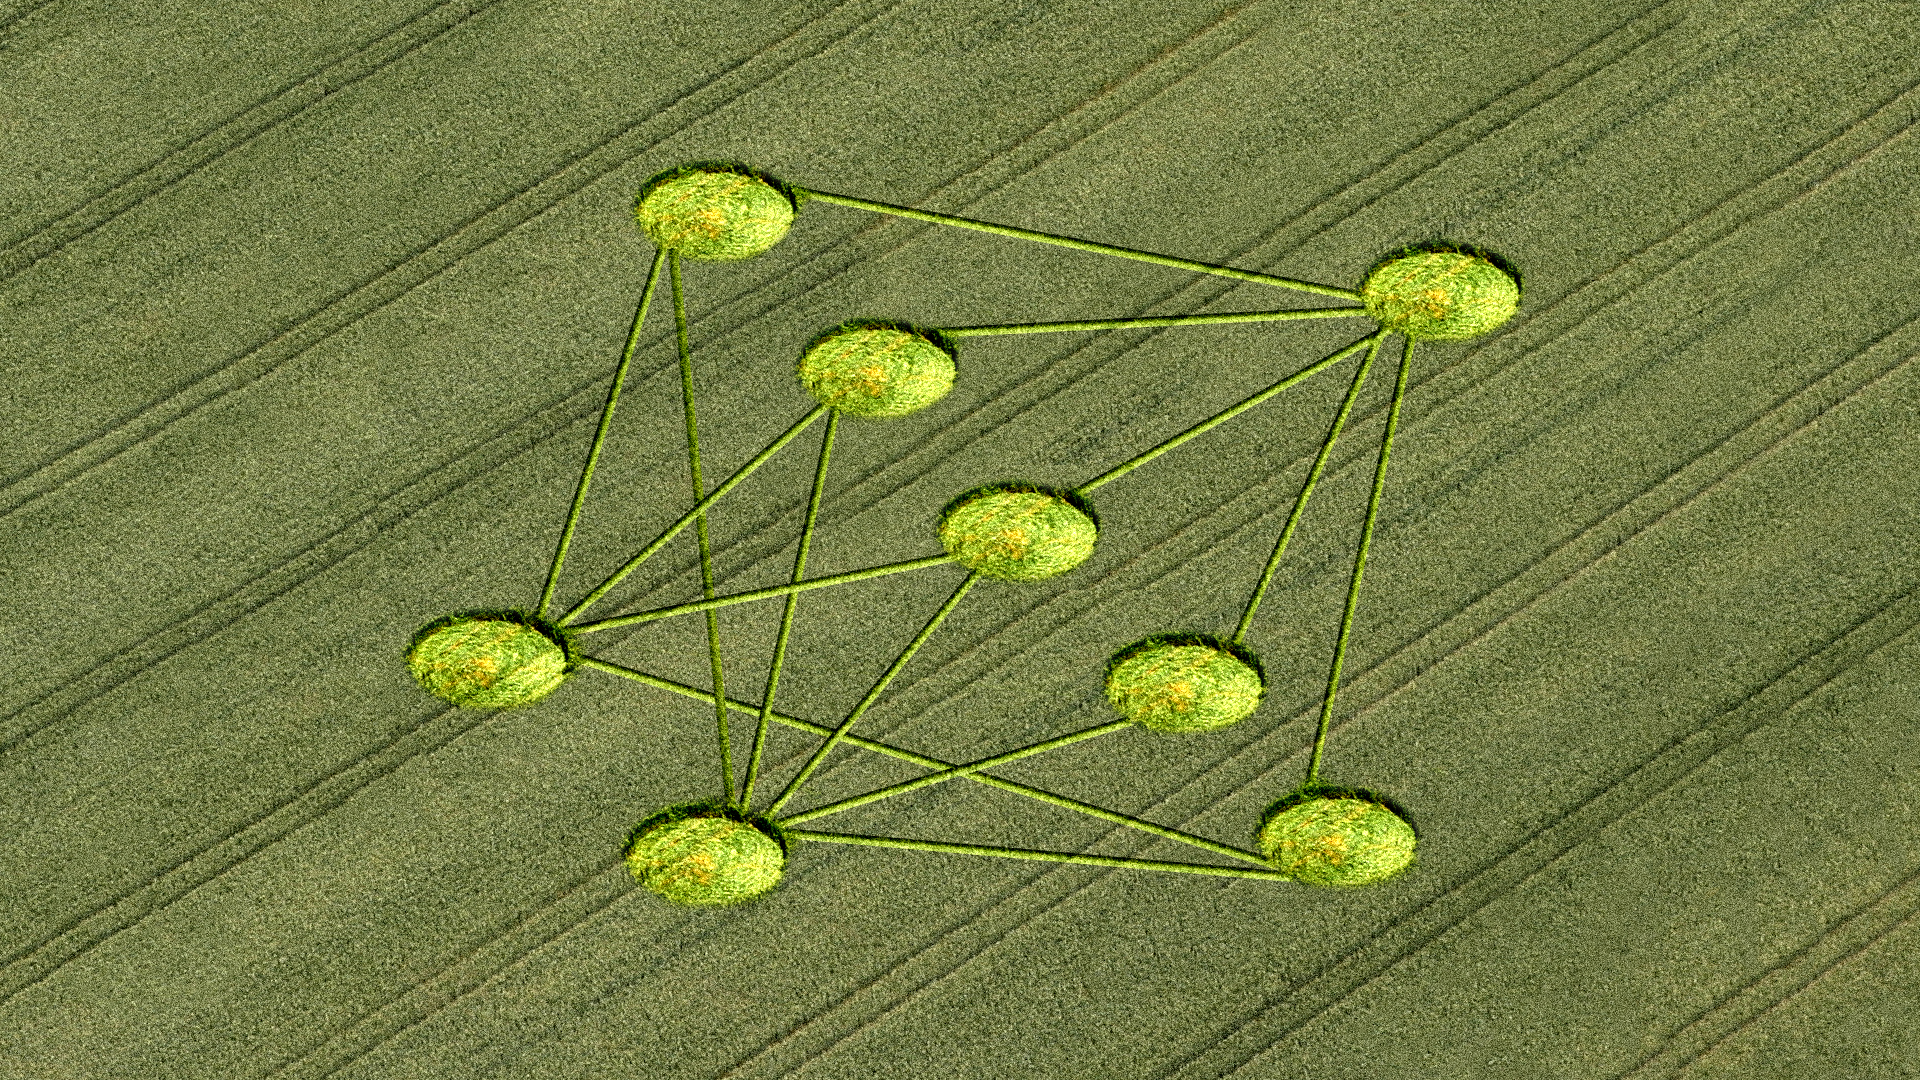 Illustration of field with nodes representing the application of AI in agriculture.